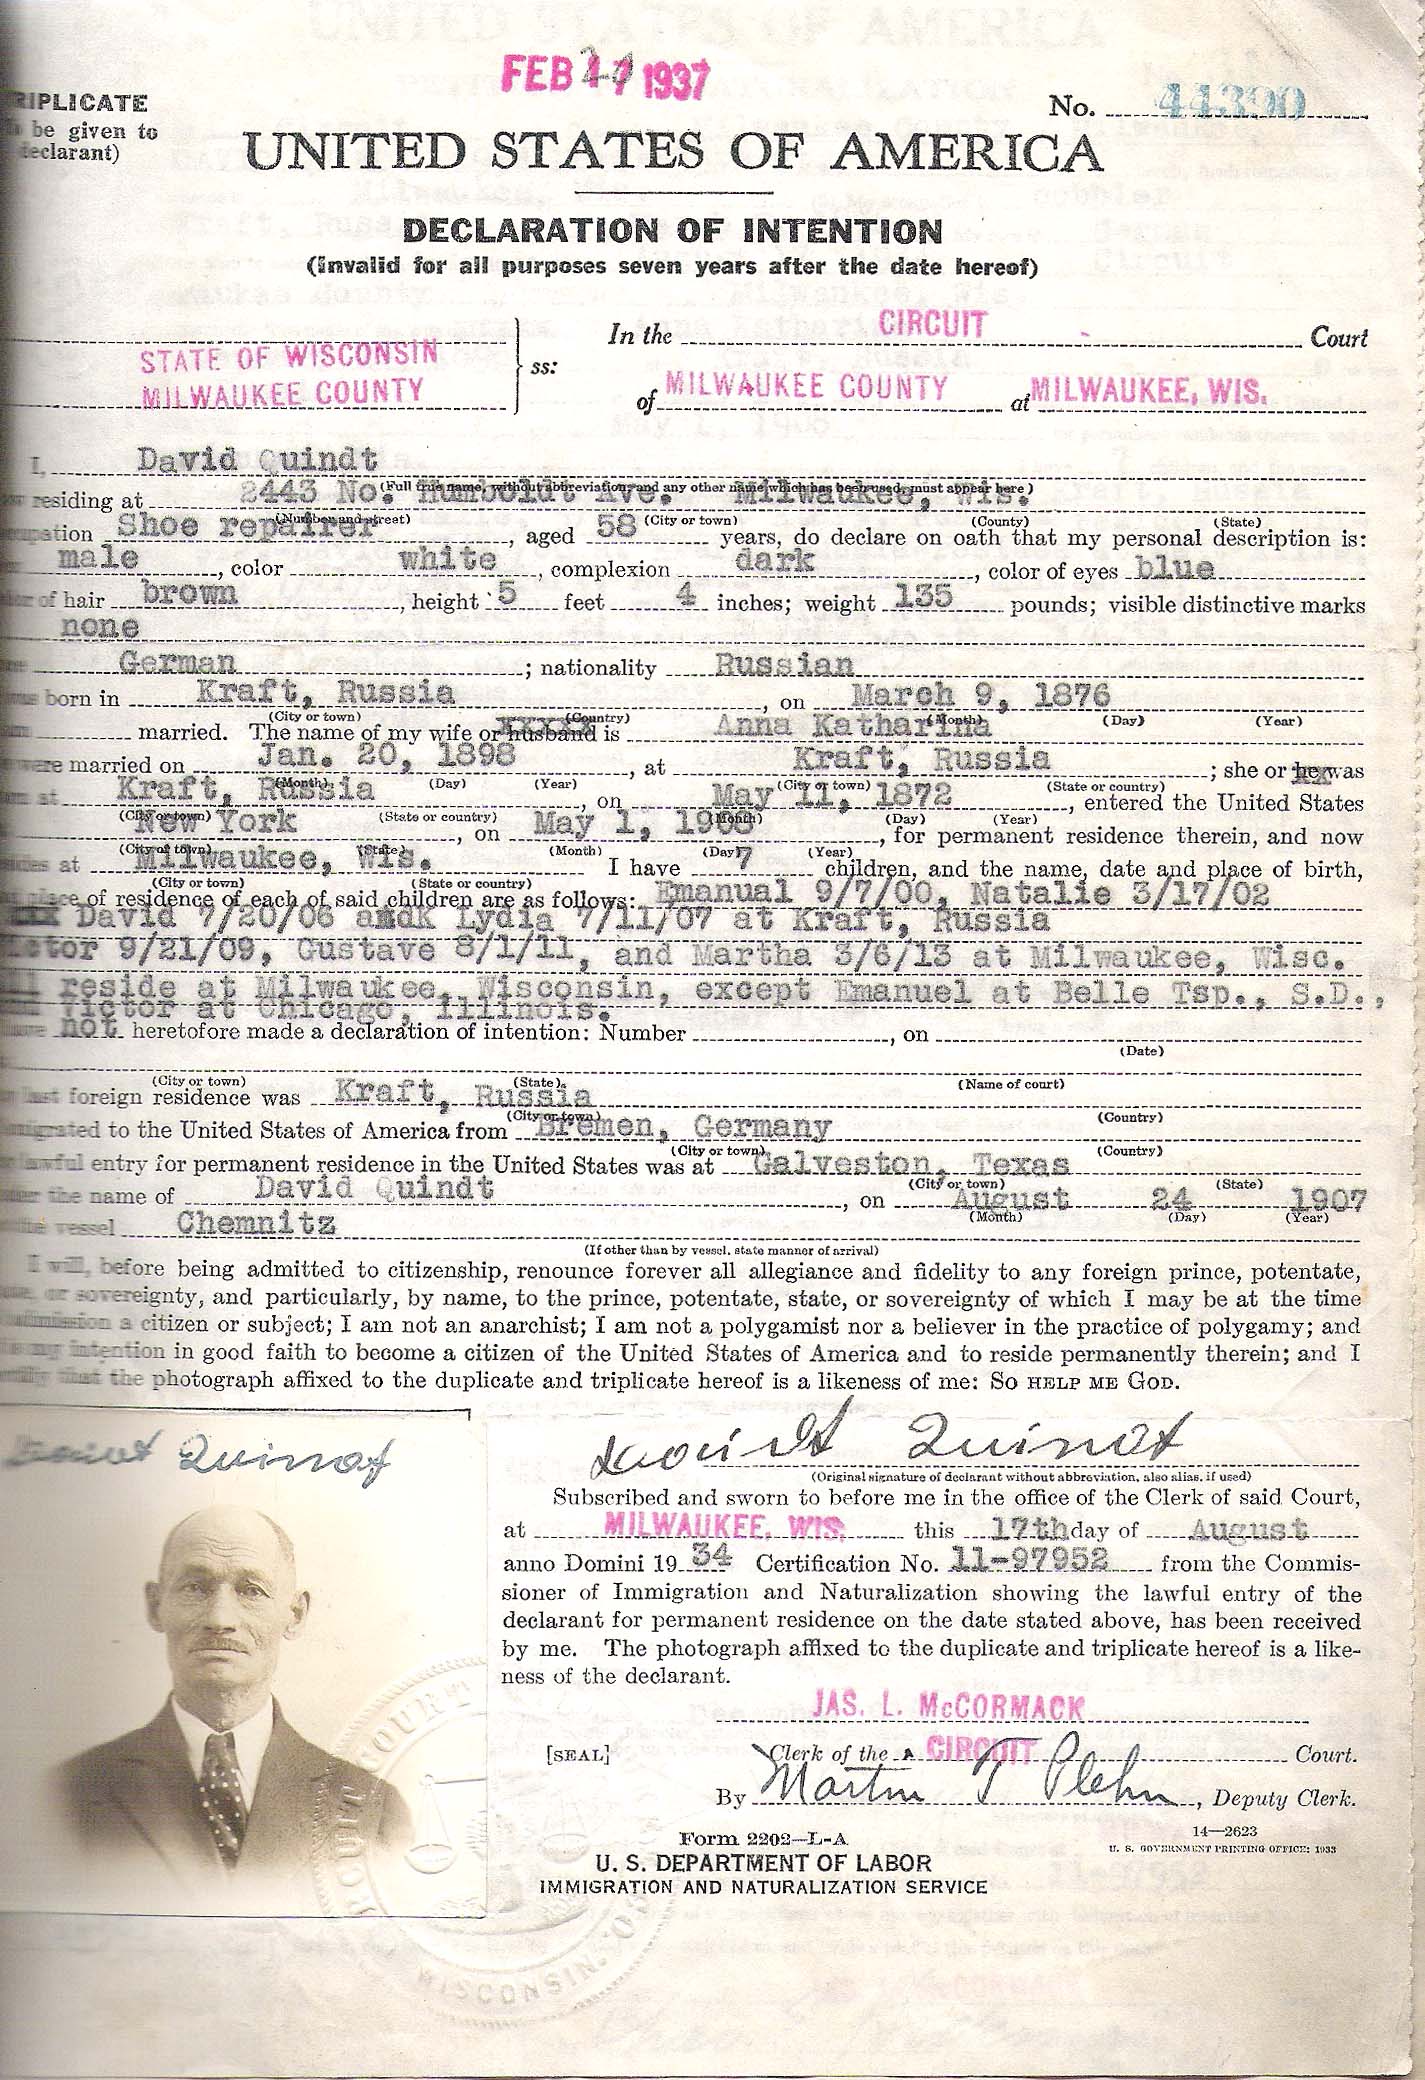 Download this Naturalization Papers picture